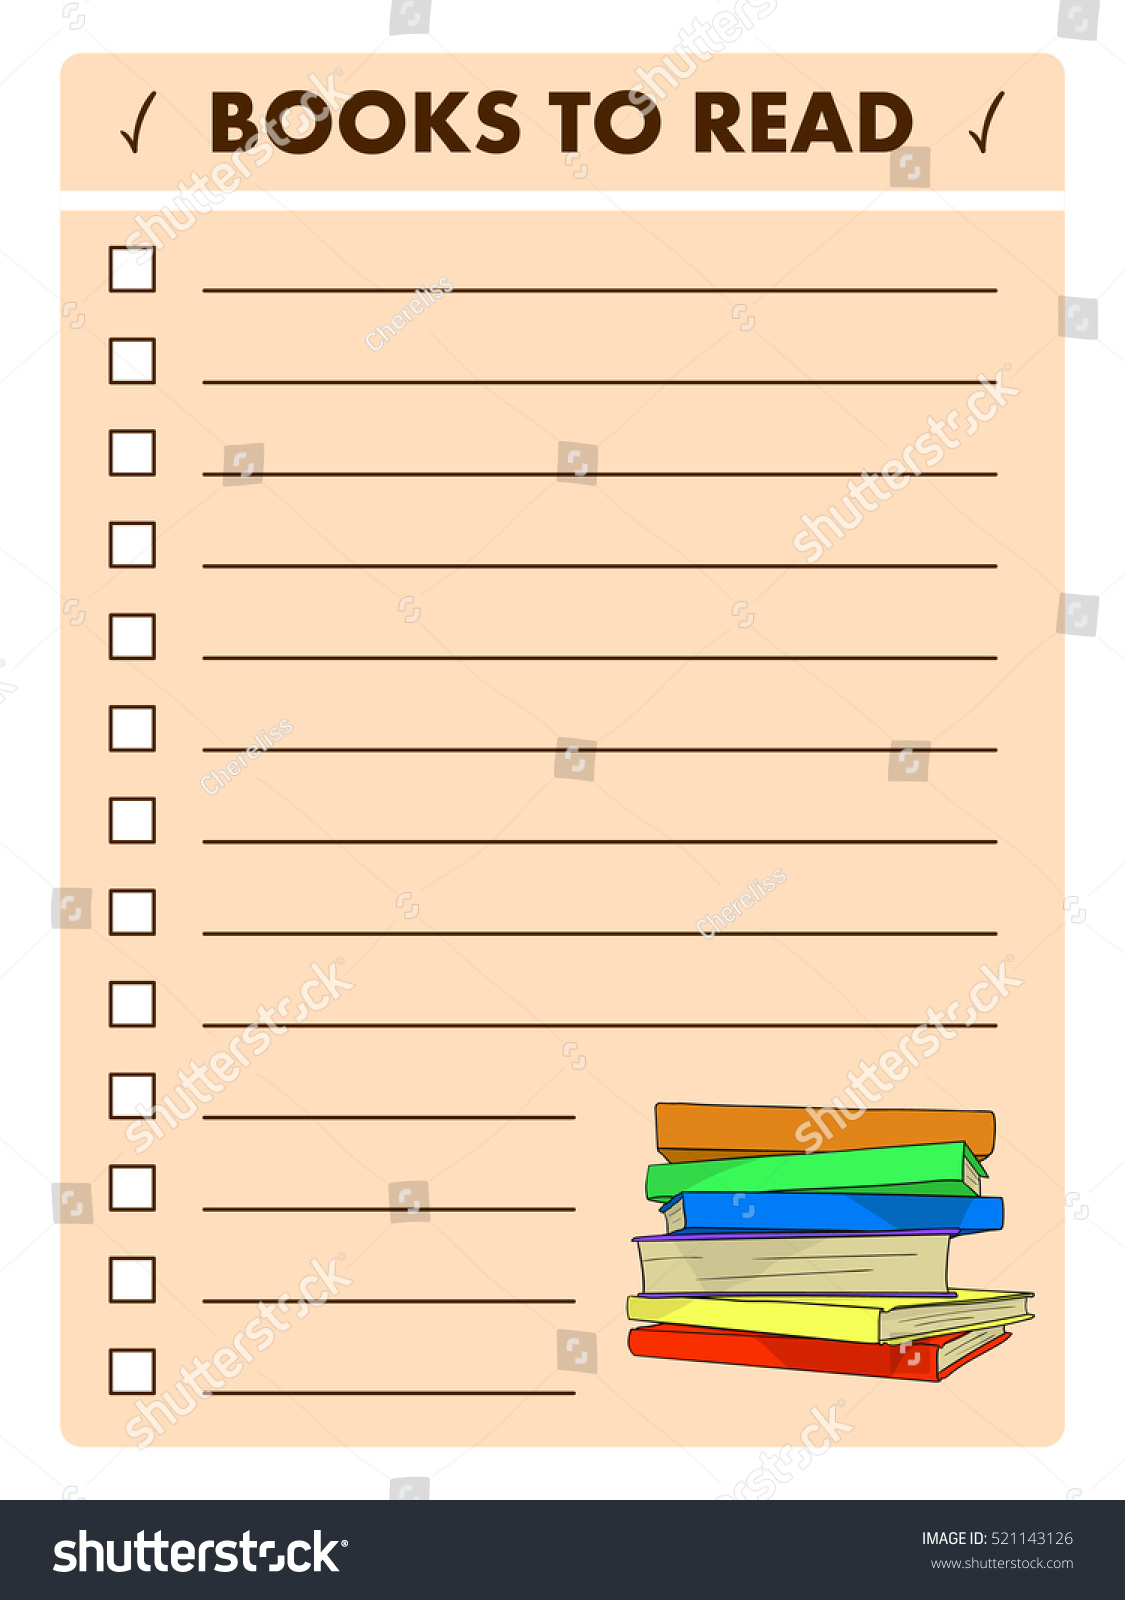 Reading List Template from image.shutterstock.com